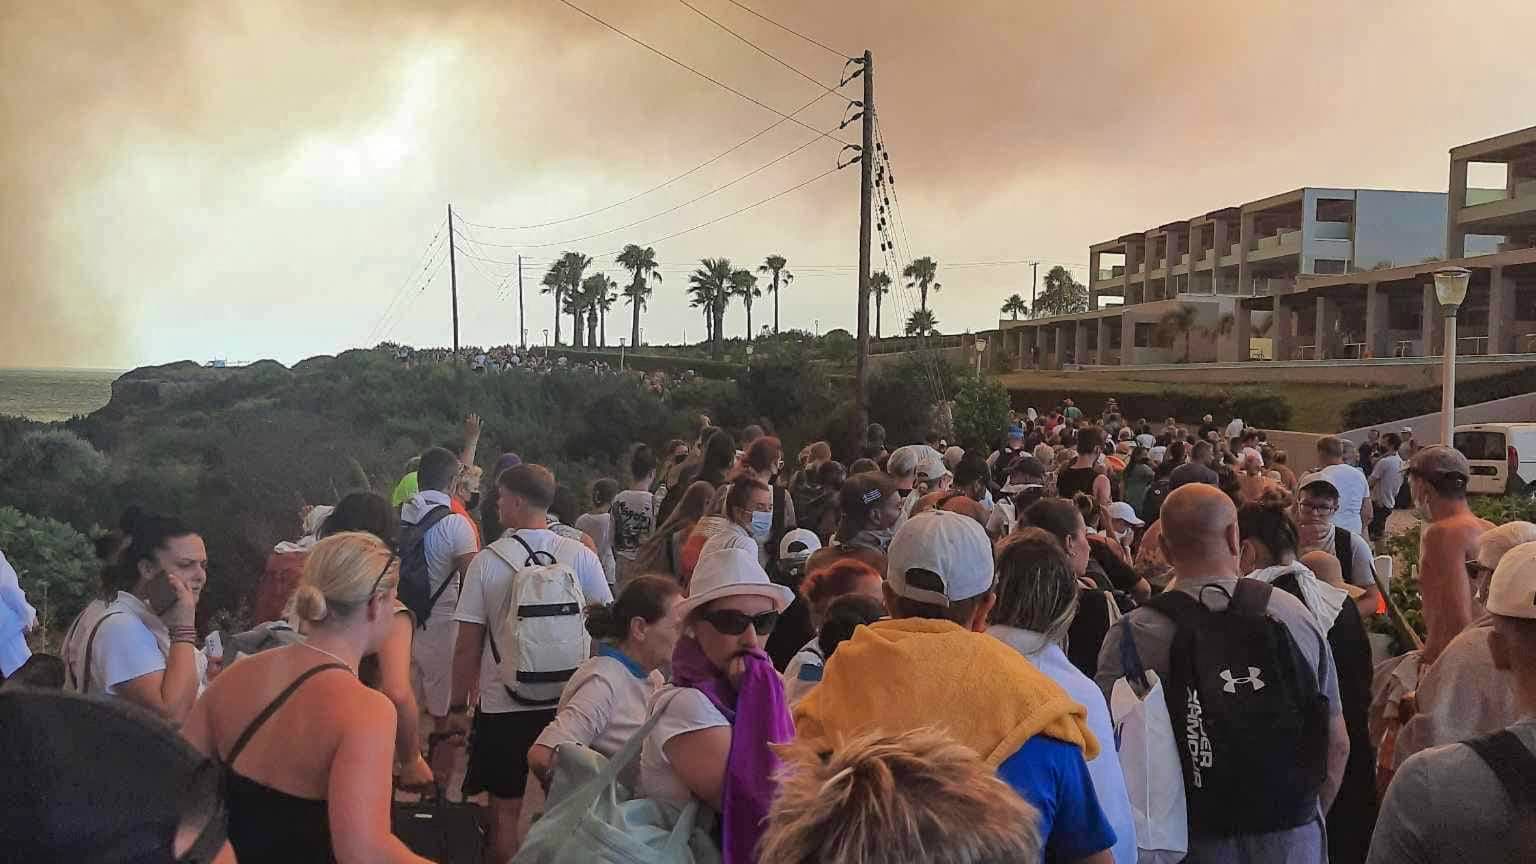 About 2,000 people were evacuated from the island of Rhodes